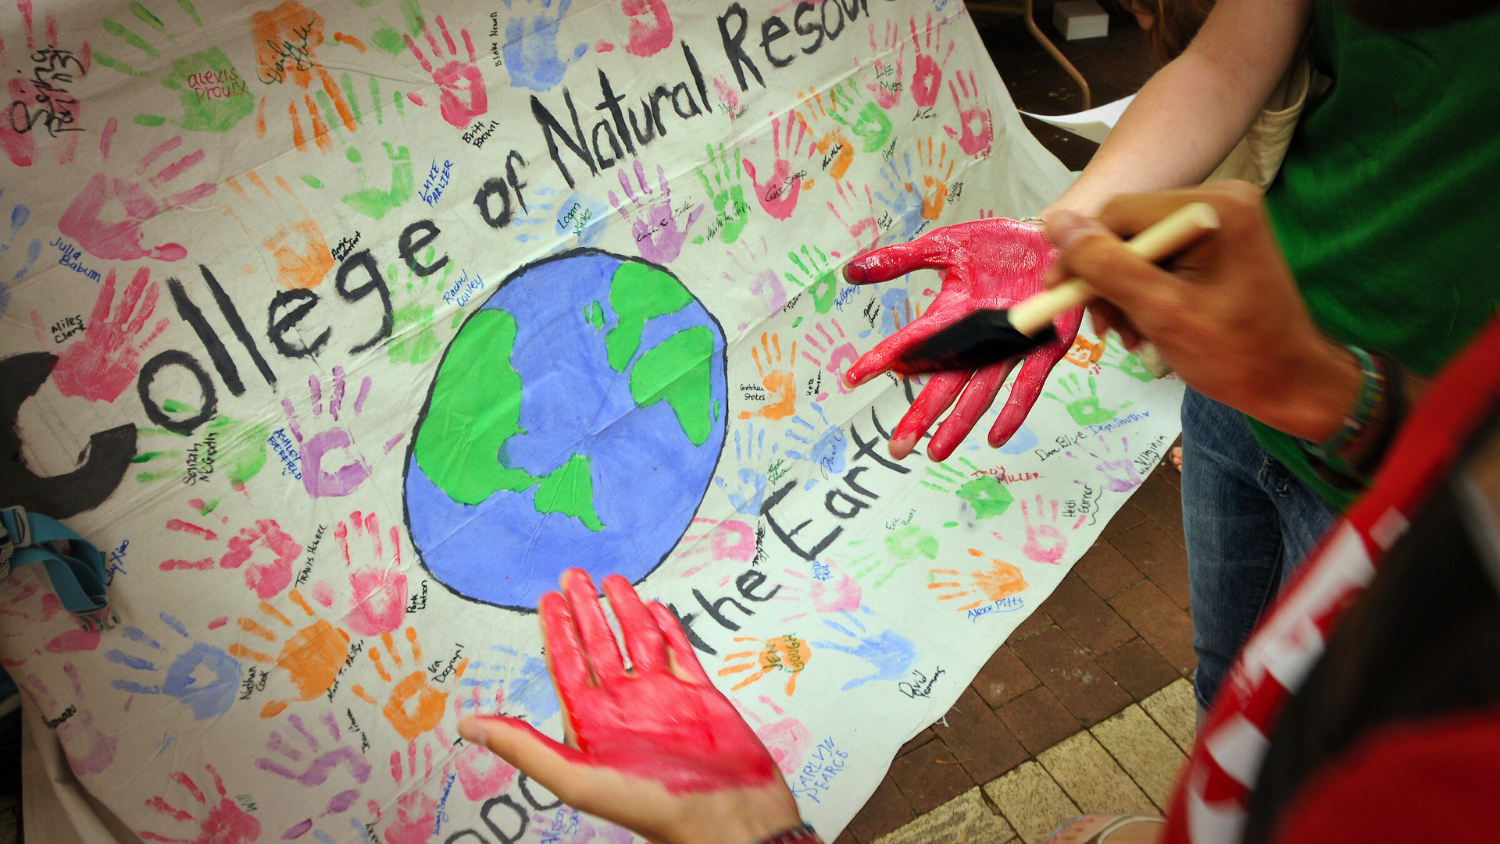 students painting hands to put on a poster about celebrating Earth Day